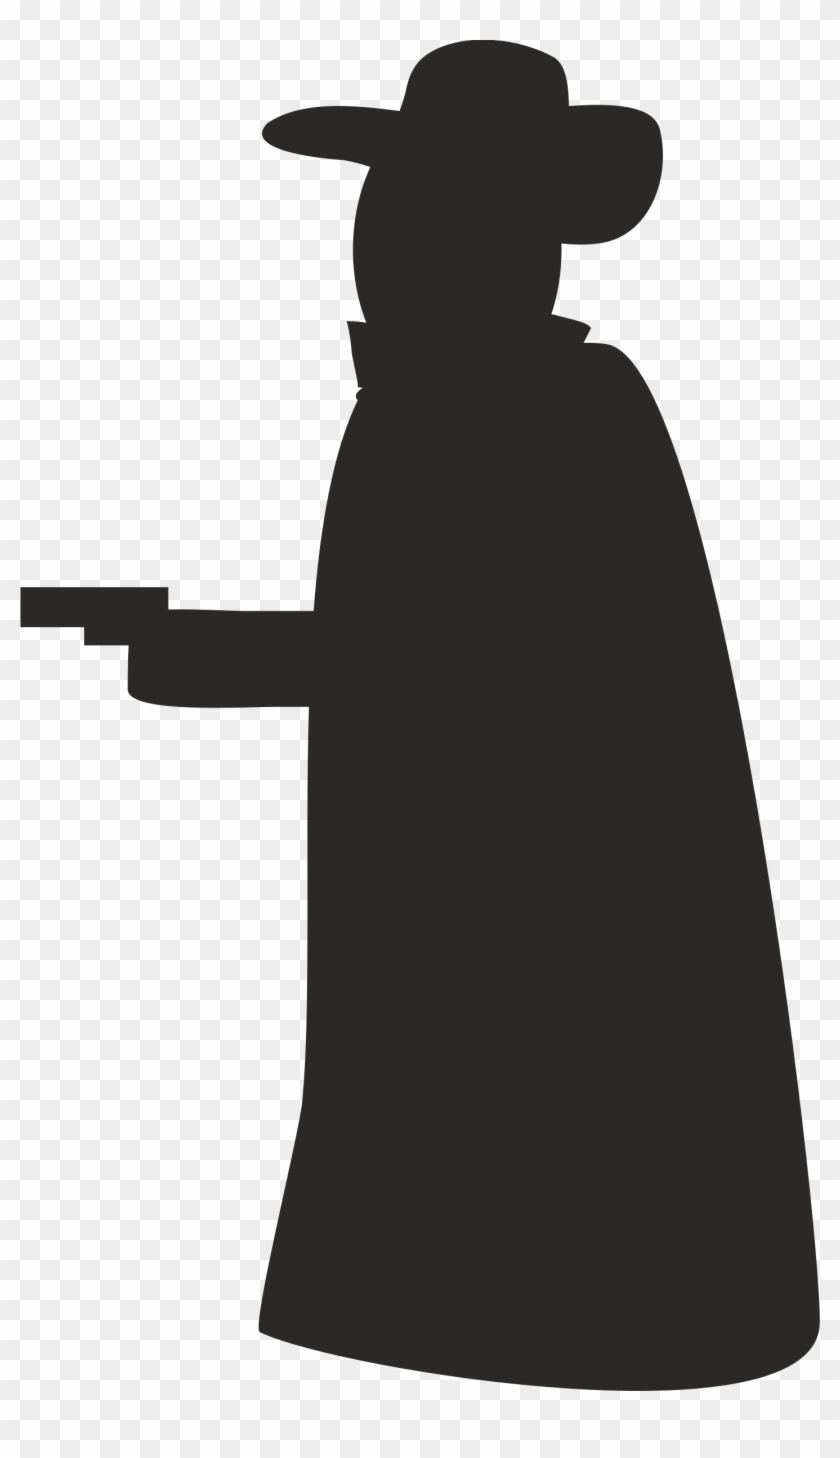 This Free Icons Png Design Of Robber With Gun Silhouette Clipart #1370208